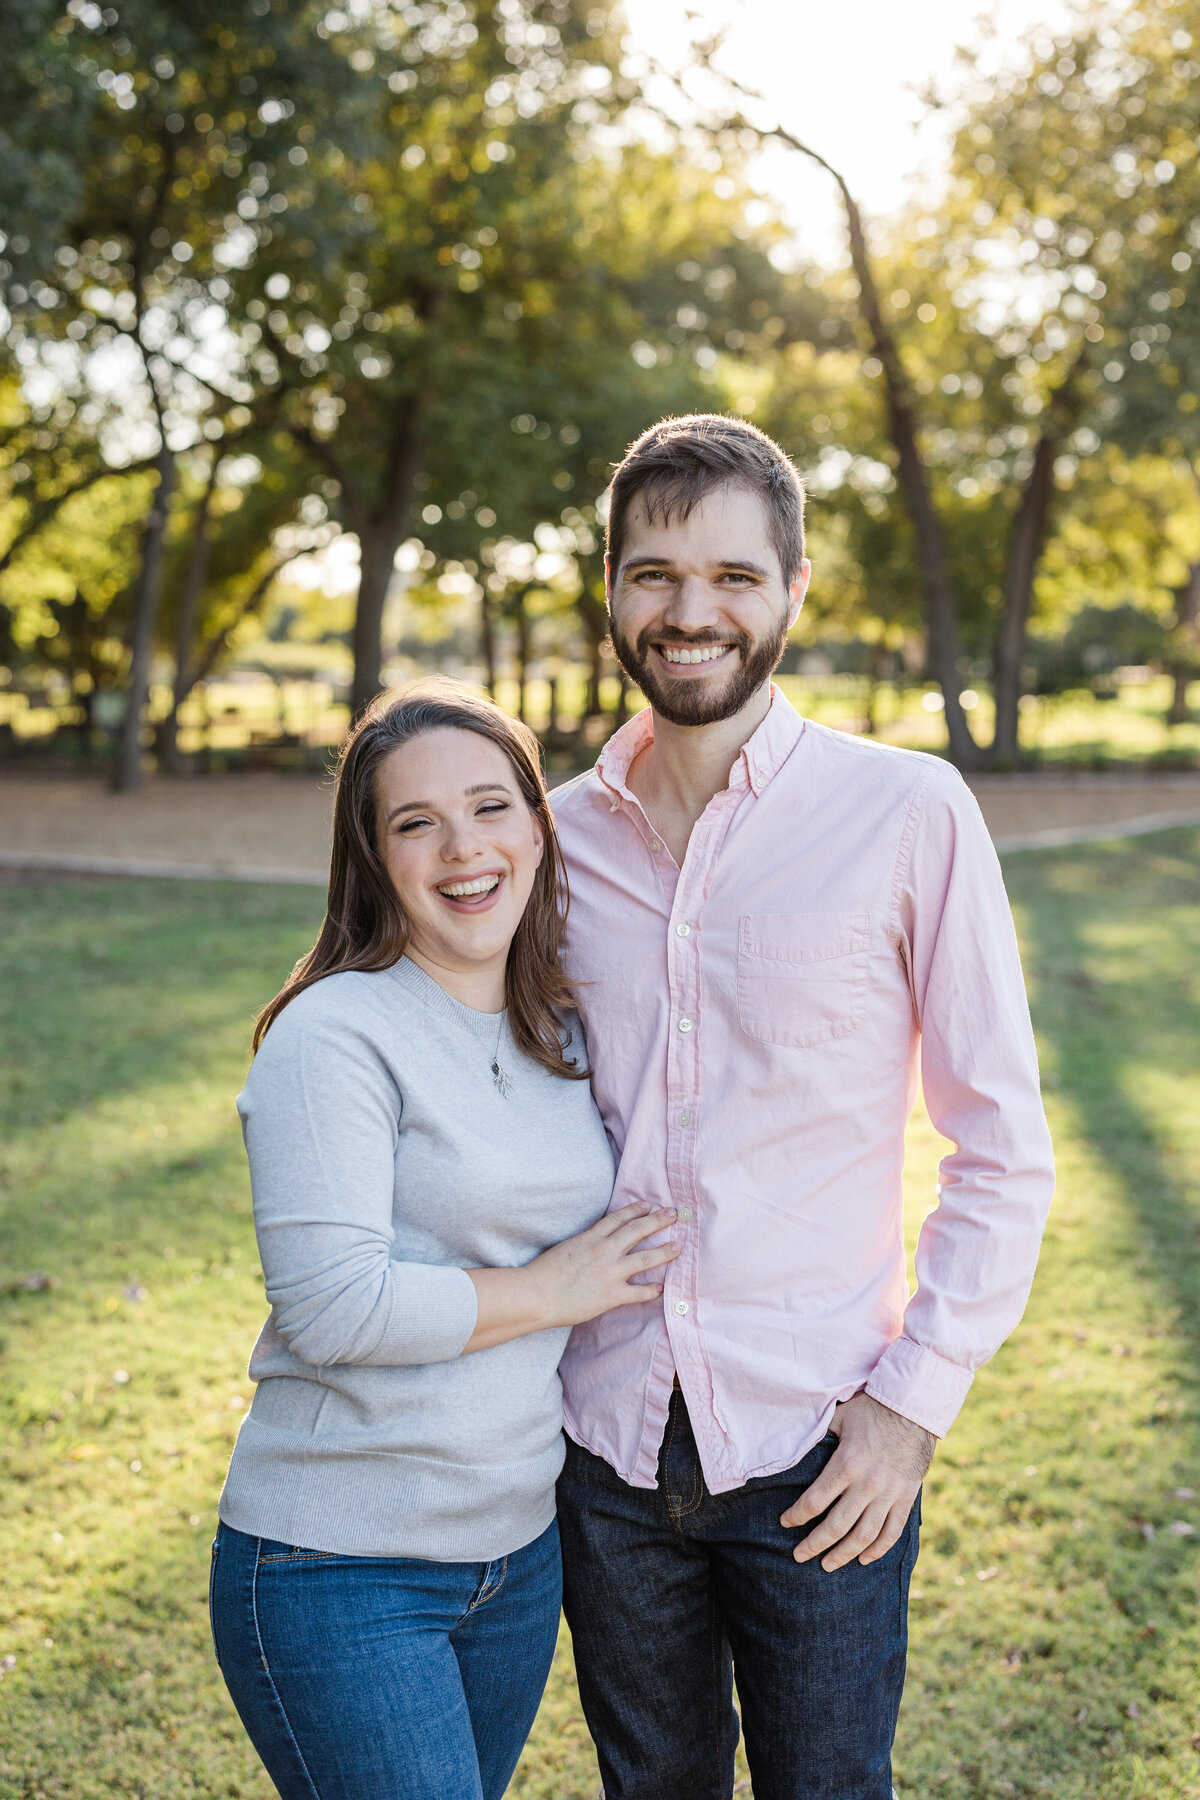 A couple posing joyfully together in a park during their engagement photoshoot in Dallas, Texas. The woman on the left is wearing a grey top, a necklace and jeans. The man on the right is wearing a salmon dress shirt and dark jeans.